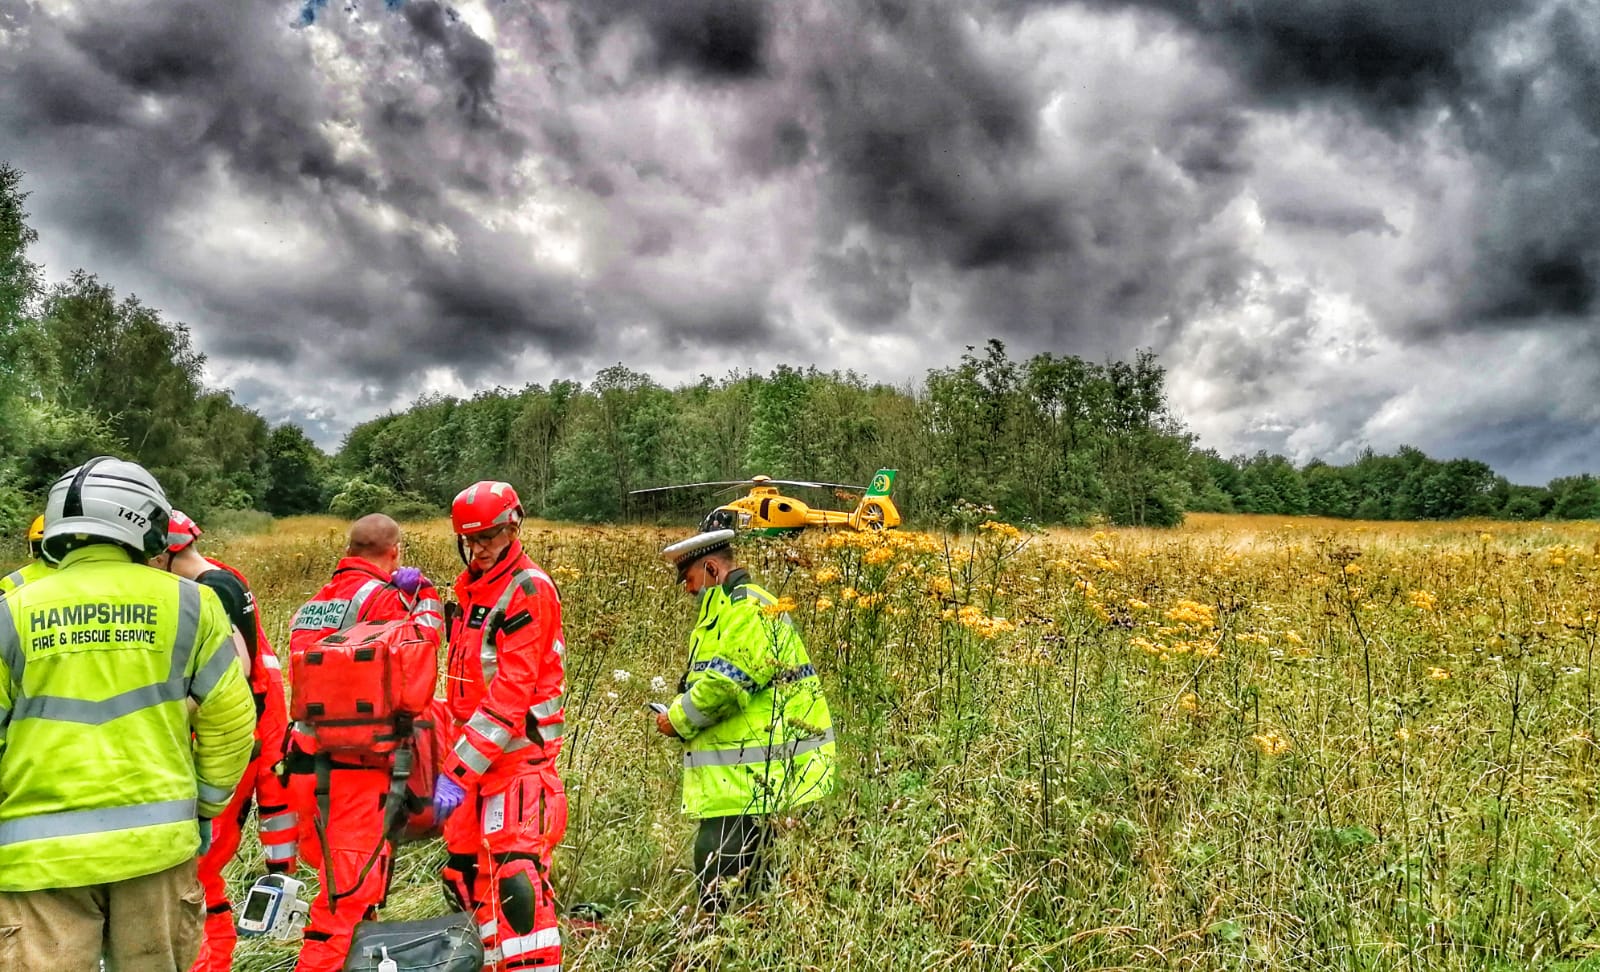 A team of paramedics, doctors, police and fire service in a field with a helicopter in the background